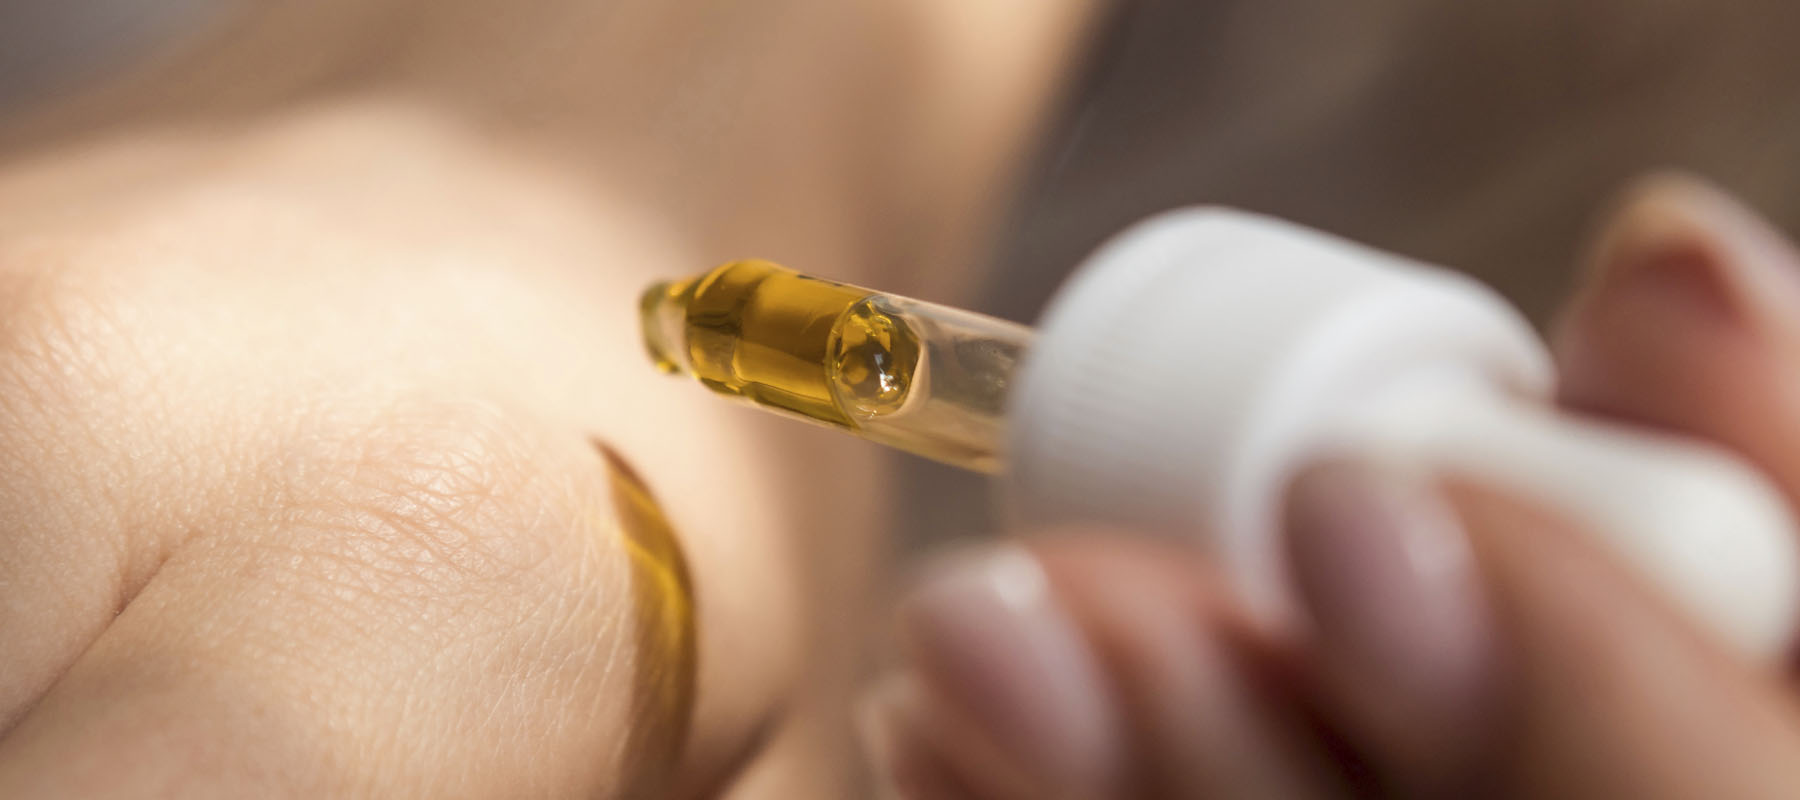 CBD Cosmetics All You Need to Know about CBD Skincare